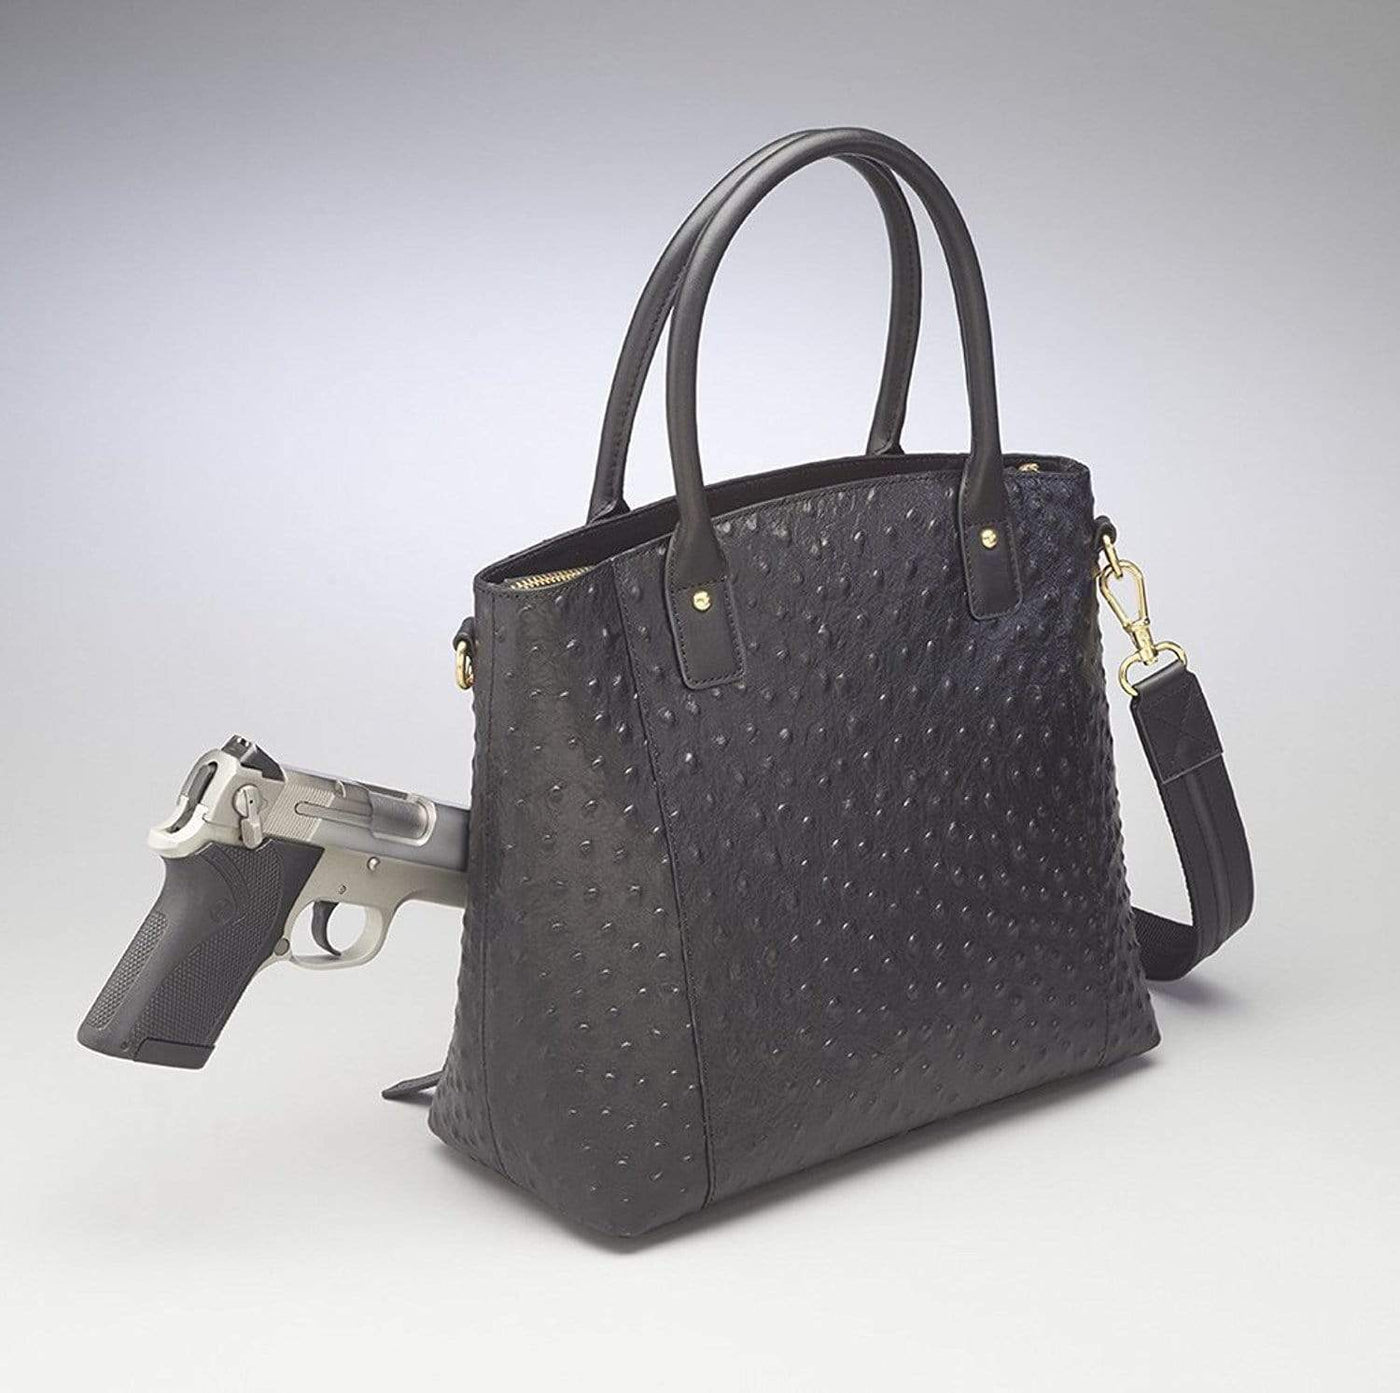 Gun Tote'n Mamas Concealed Carry Purse  Ostrich Town Tote by GTM Original